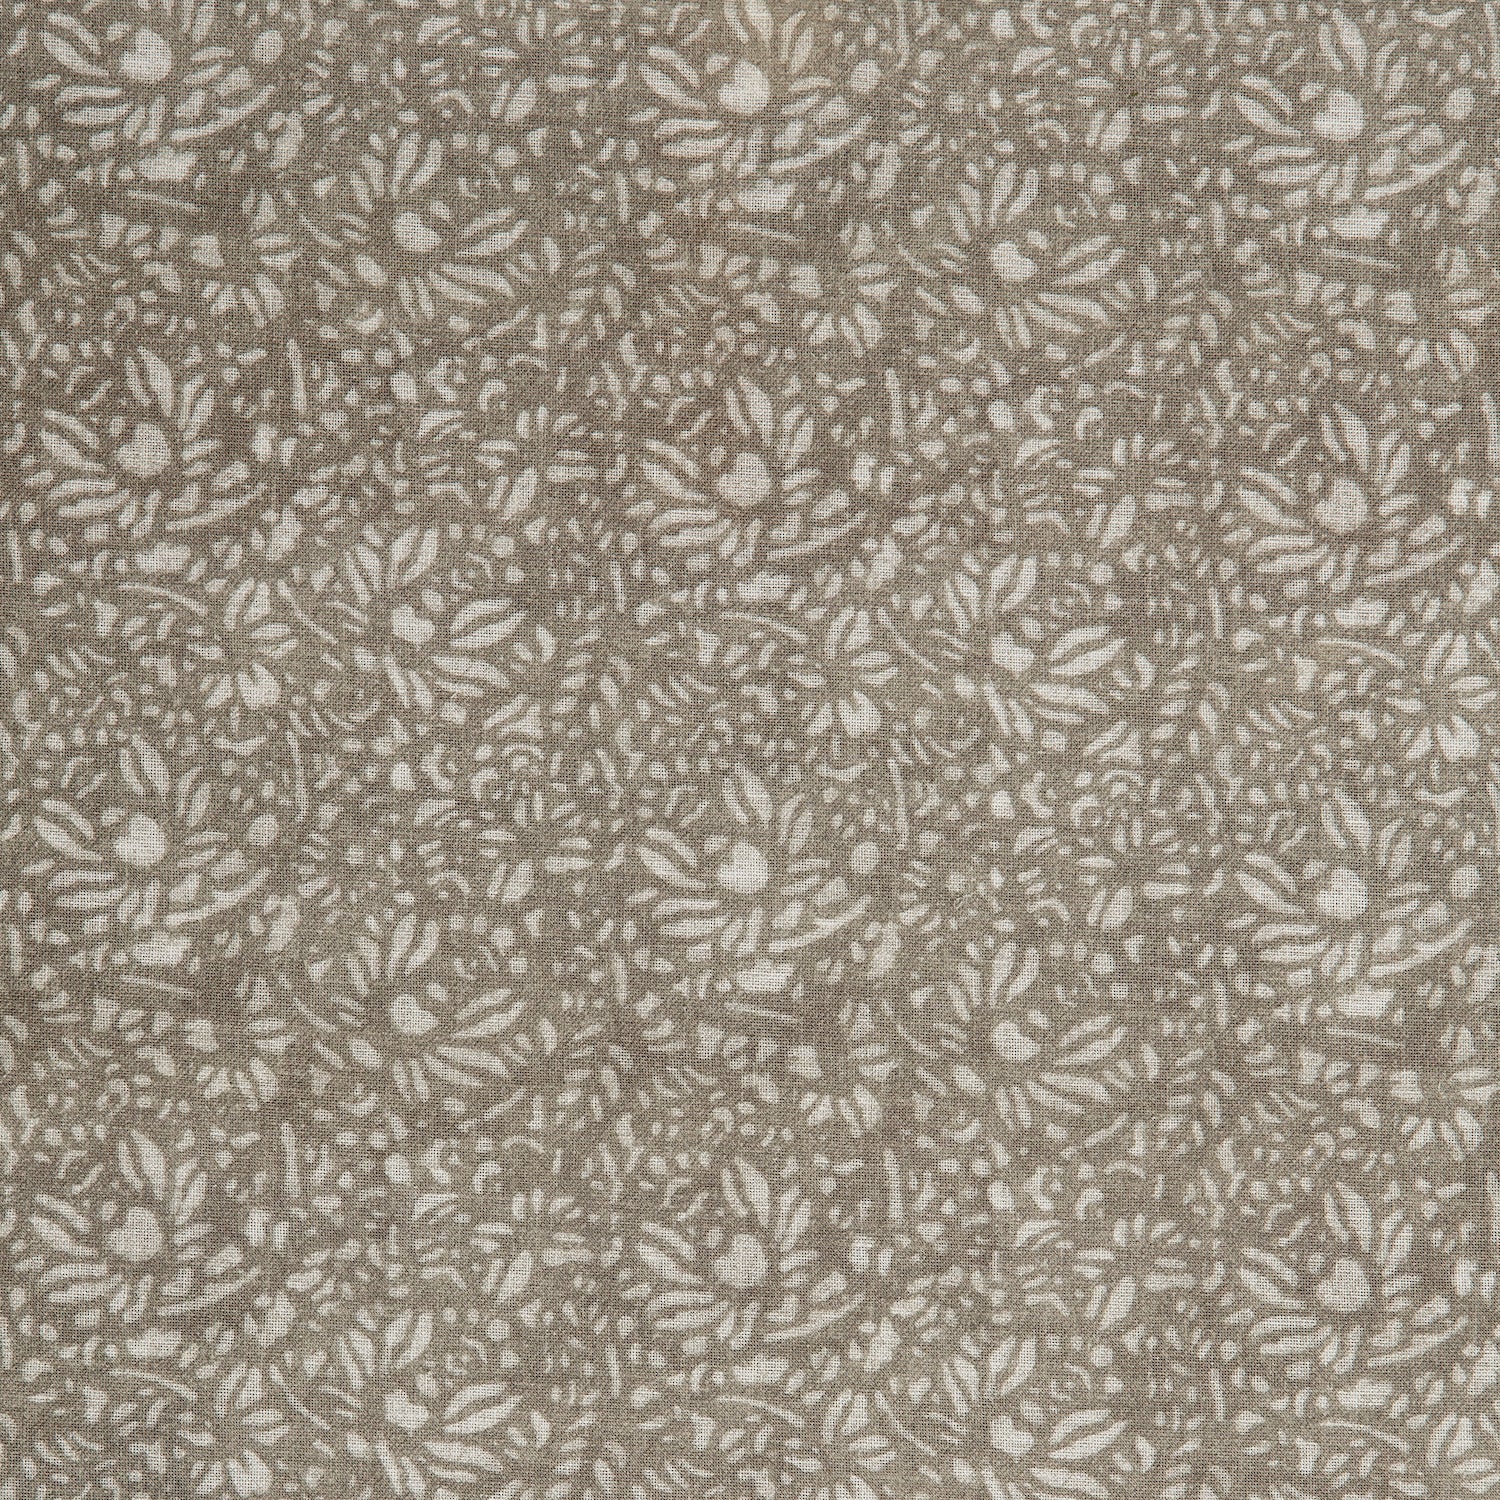 Detail of a printed linen fabric in a repeating chrysanthemum pattern in cream on a light brown field.